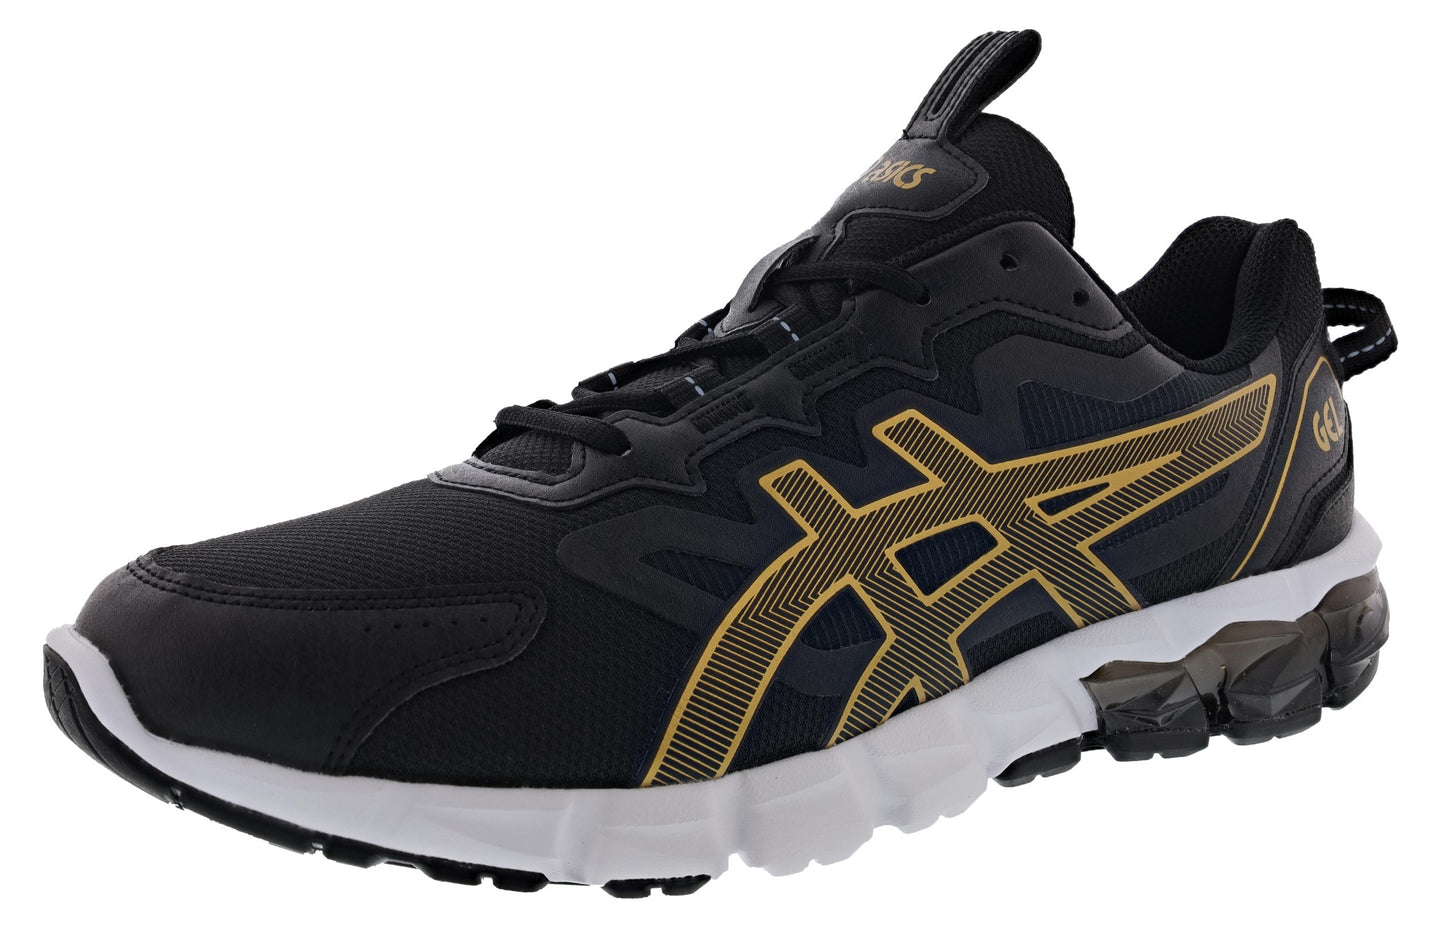 Lateral of Black/Pure Gold Asics Men's Gel Quantum 90 Lightweight Comfort Shoes